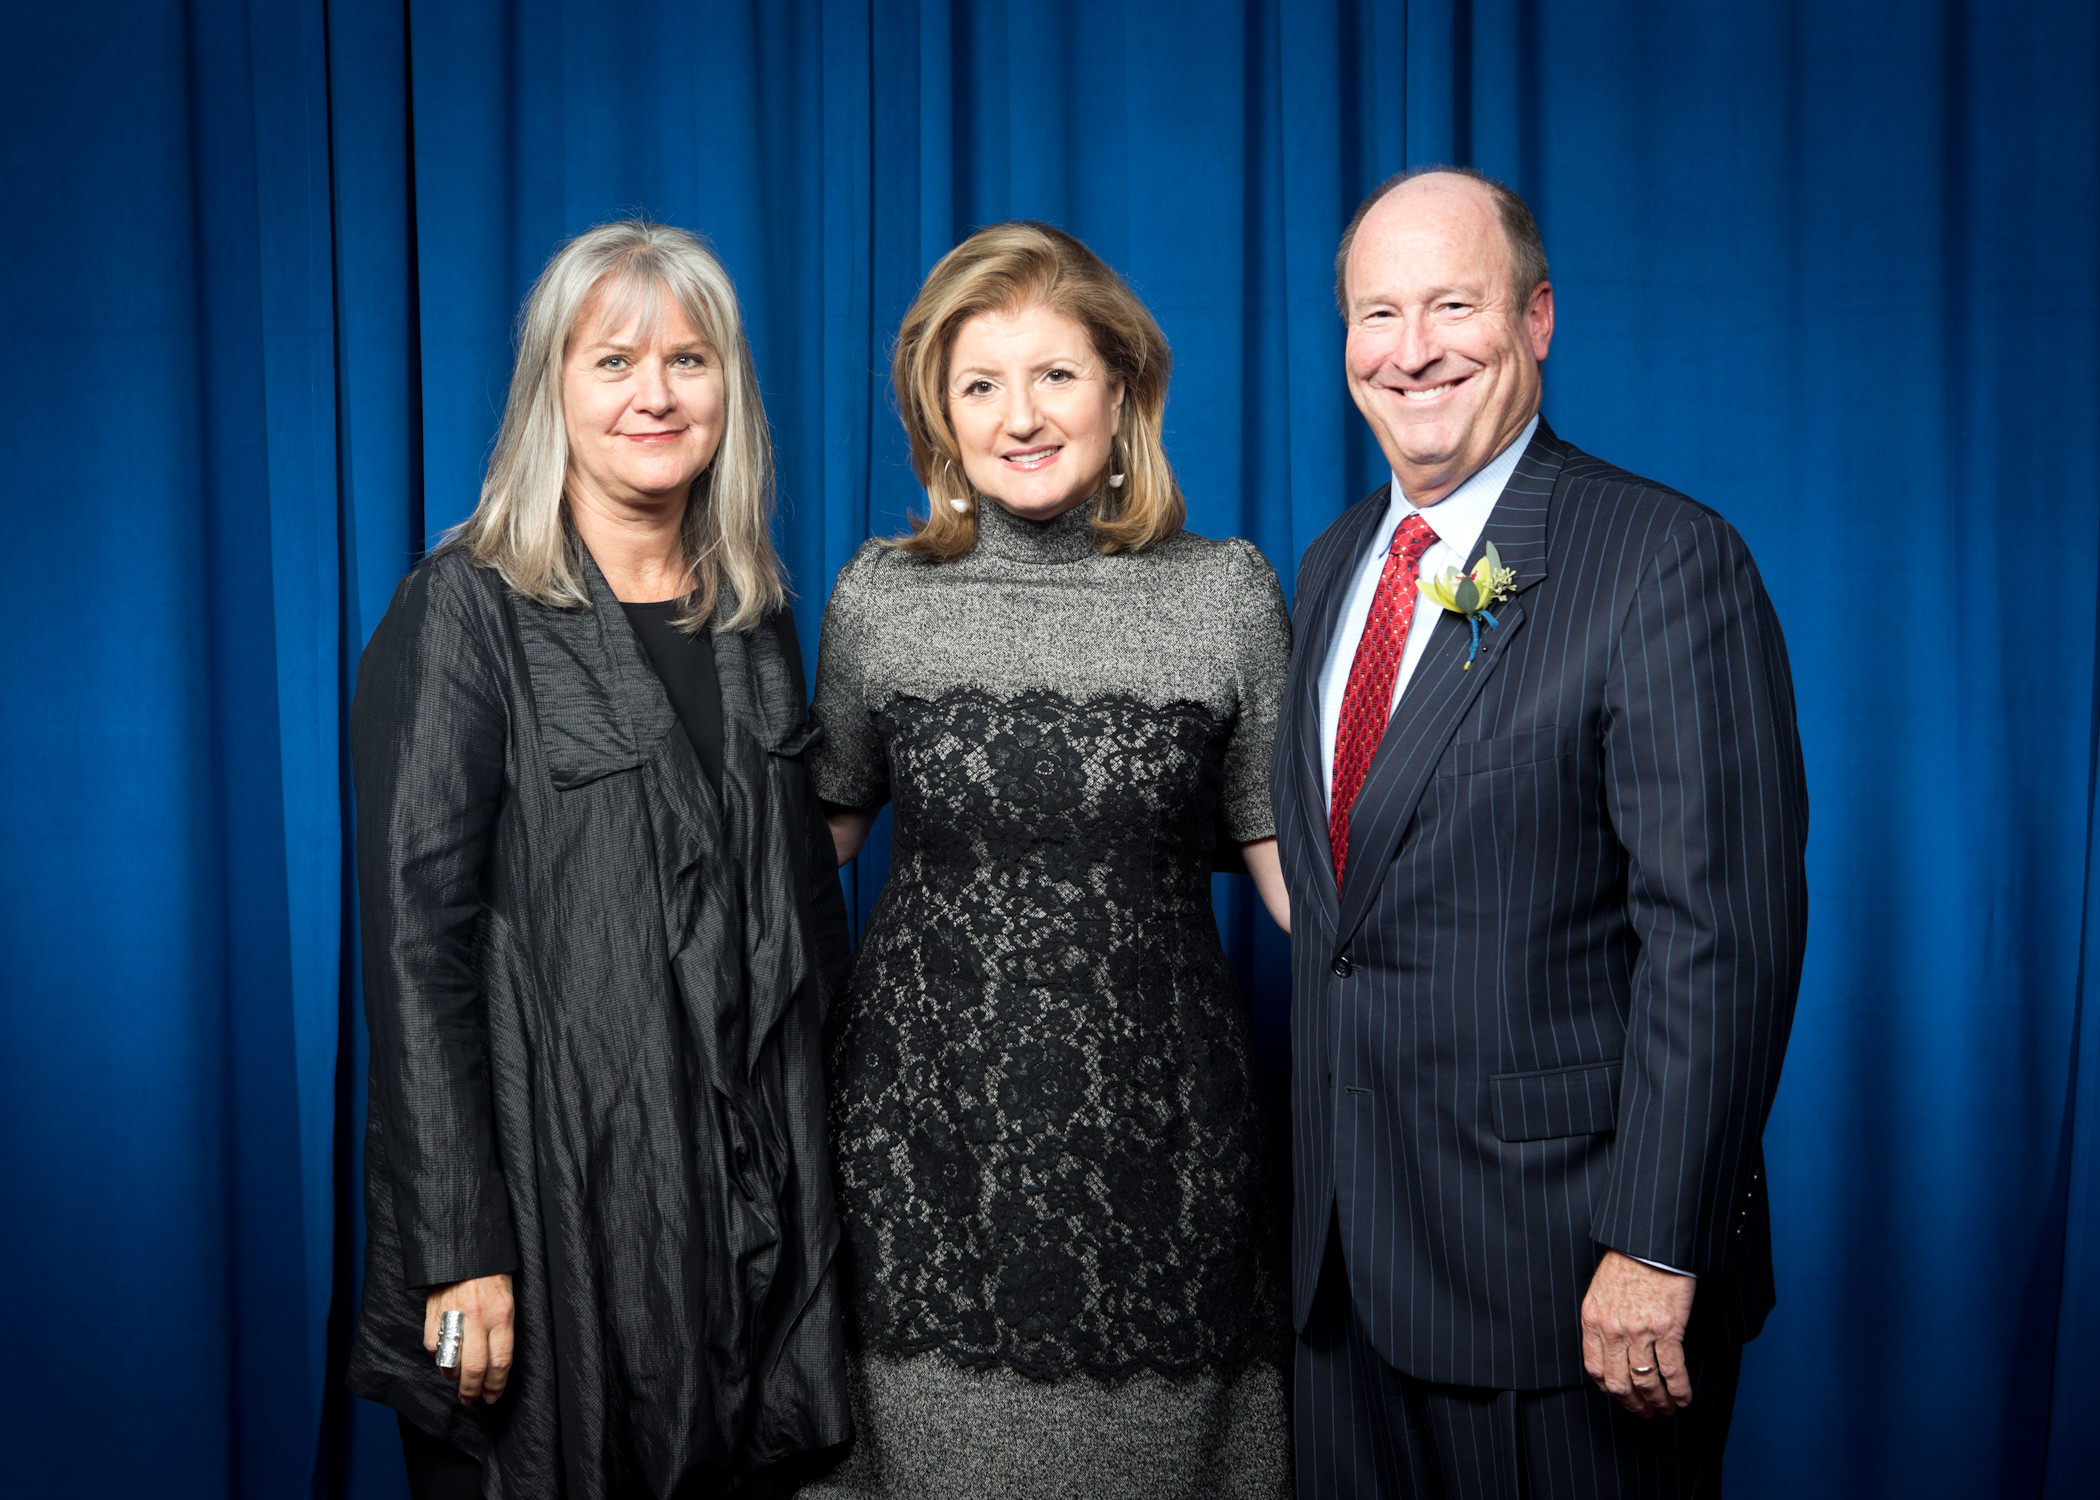 Roger Hinshaw, President of Bank of America in Oregon and SW Washington, and his wife Margaret enjoyed the opportunity to meet Arianna Huffington.